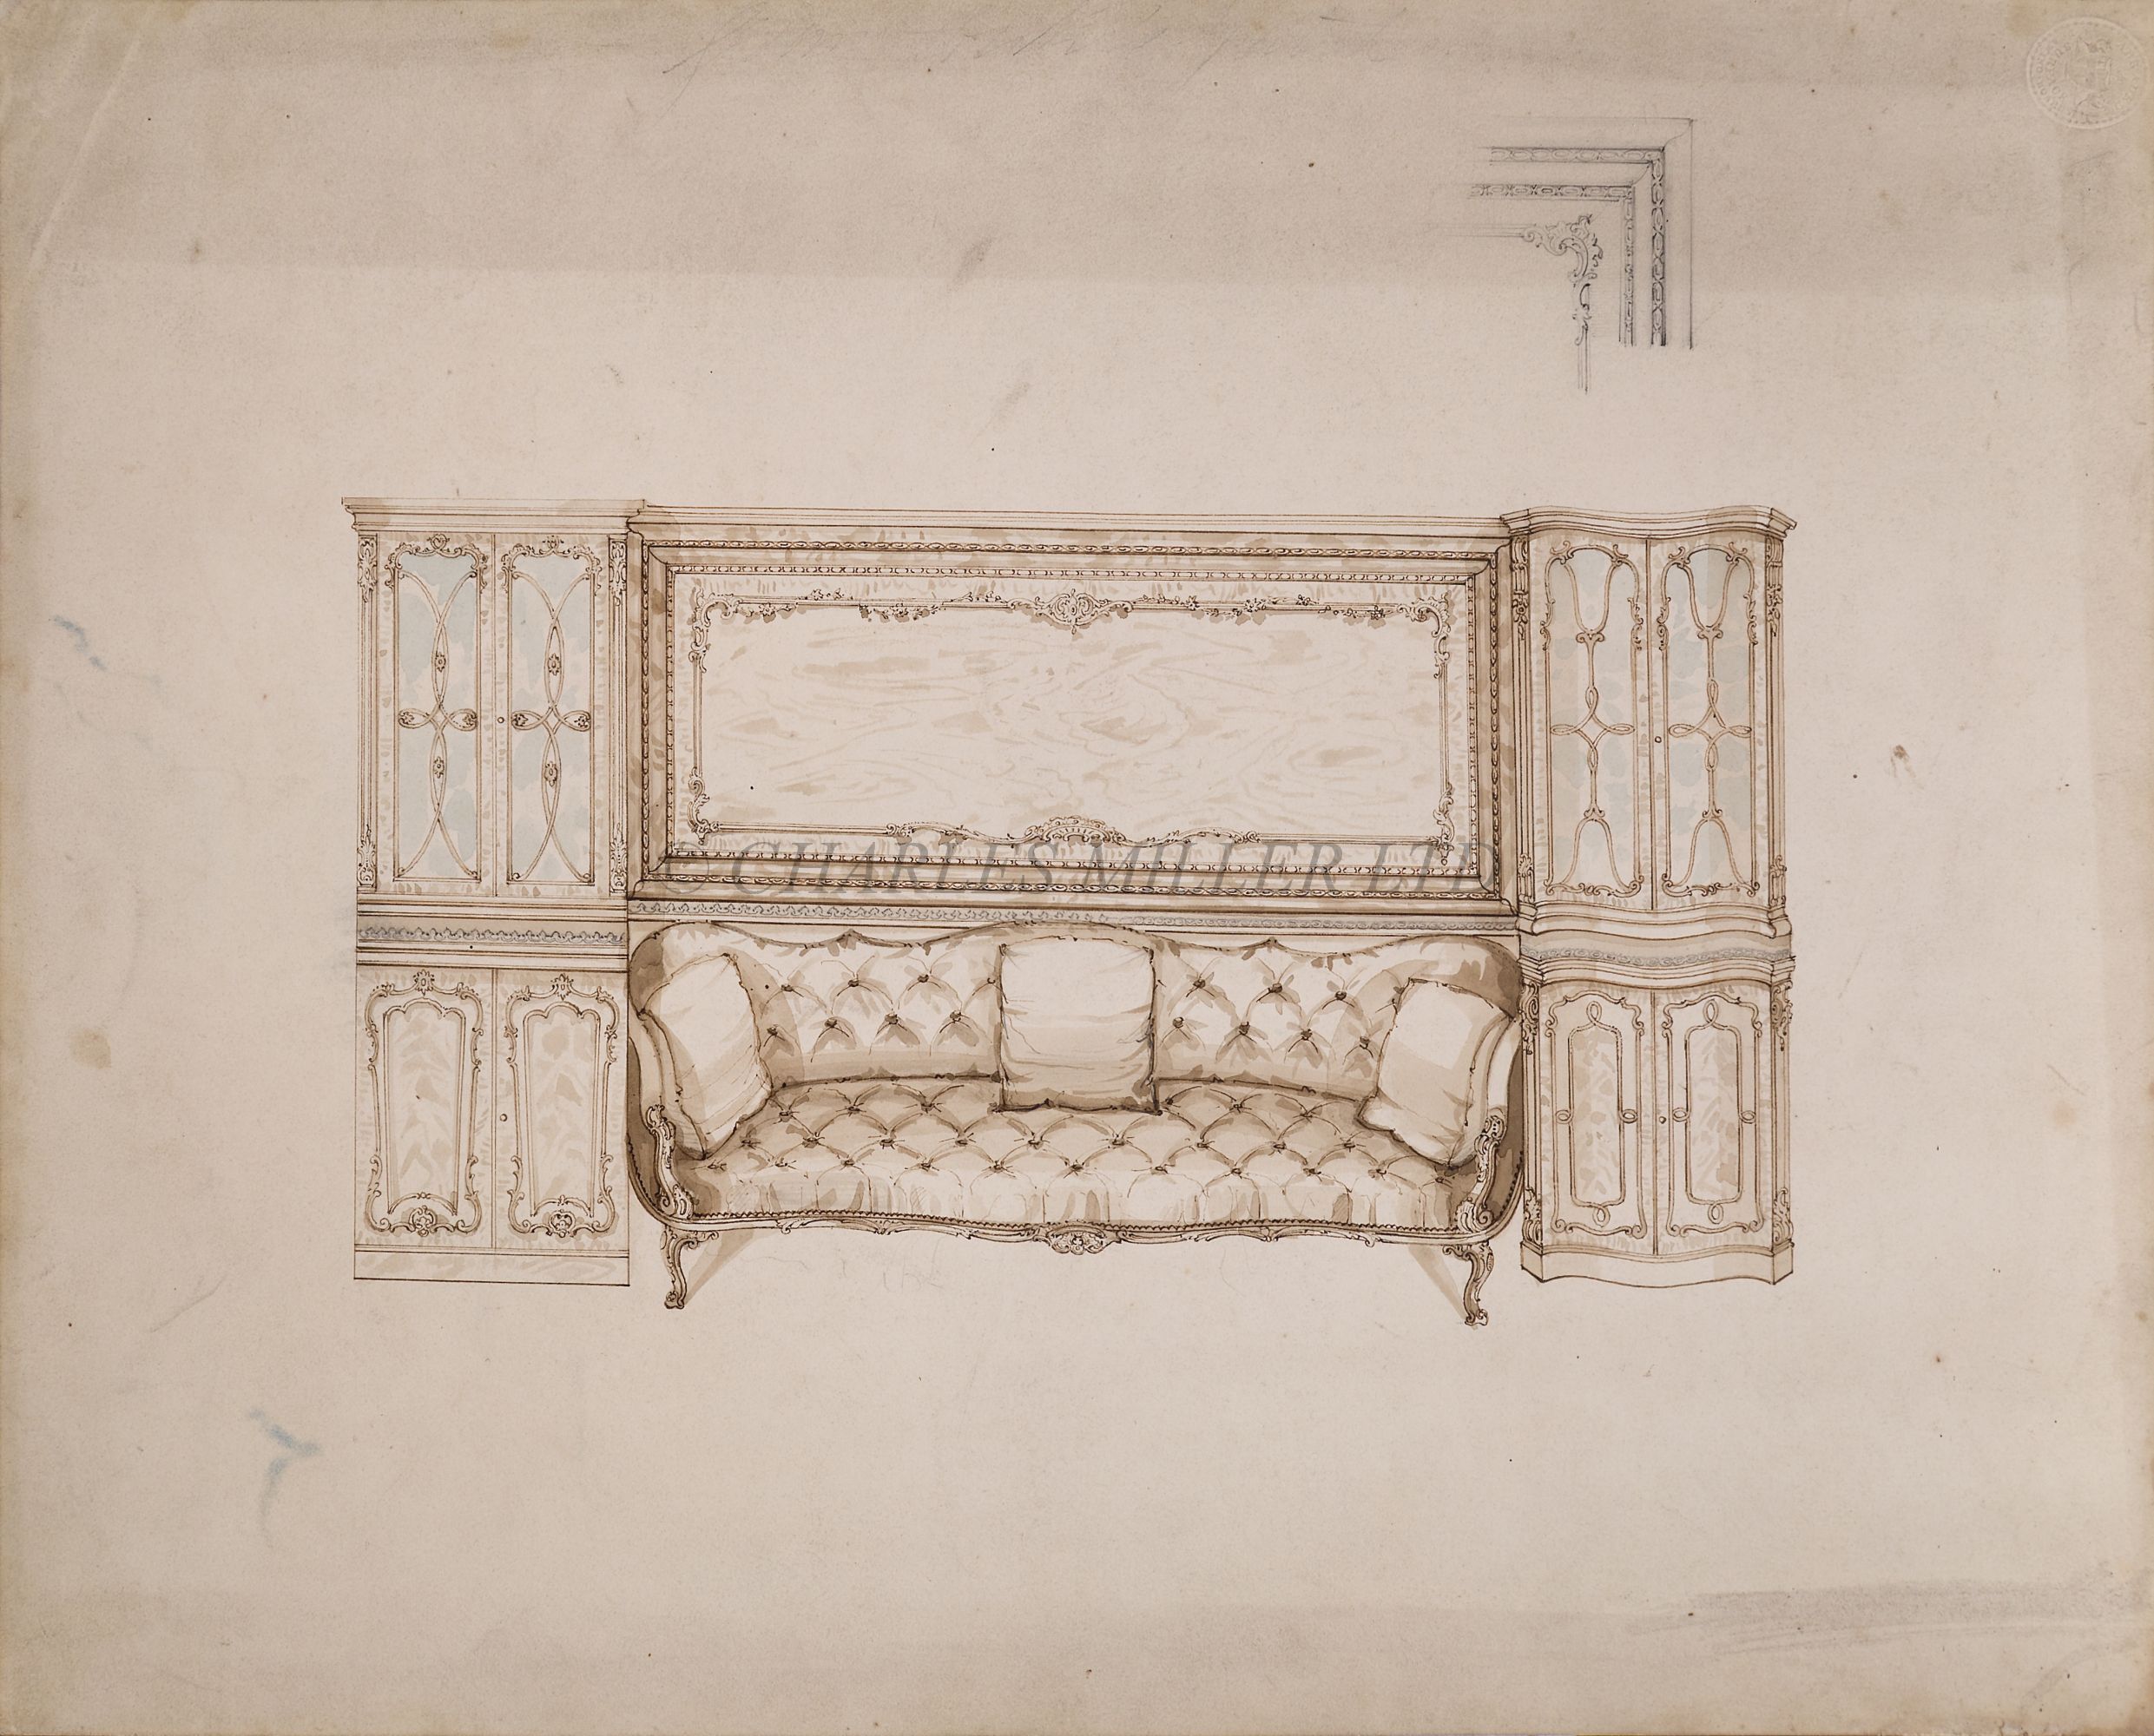 SMALL SALOON CHAIR FROM R.Y. 'FAIRY' AND TWO DESIGNS OF THE STATE ROOM, C. 1845 - Image 2 of 3